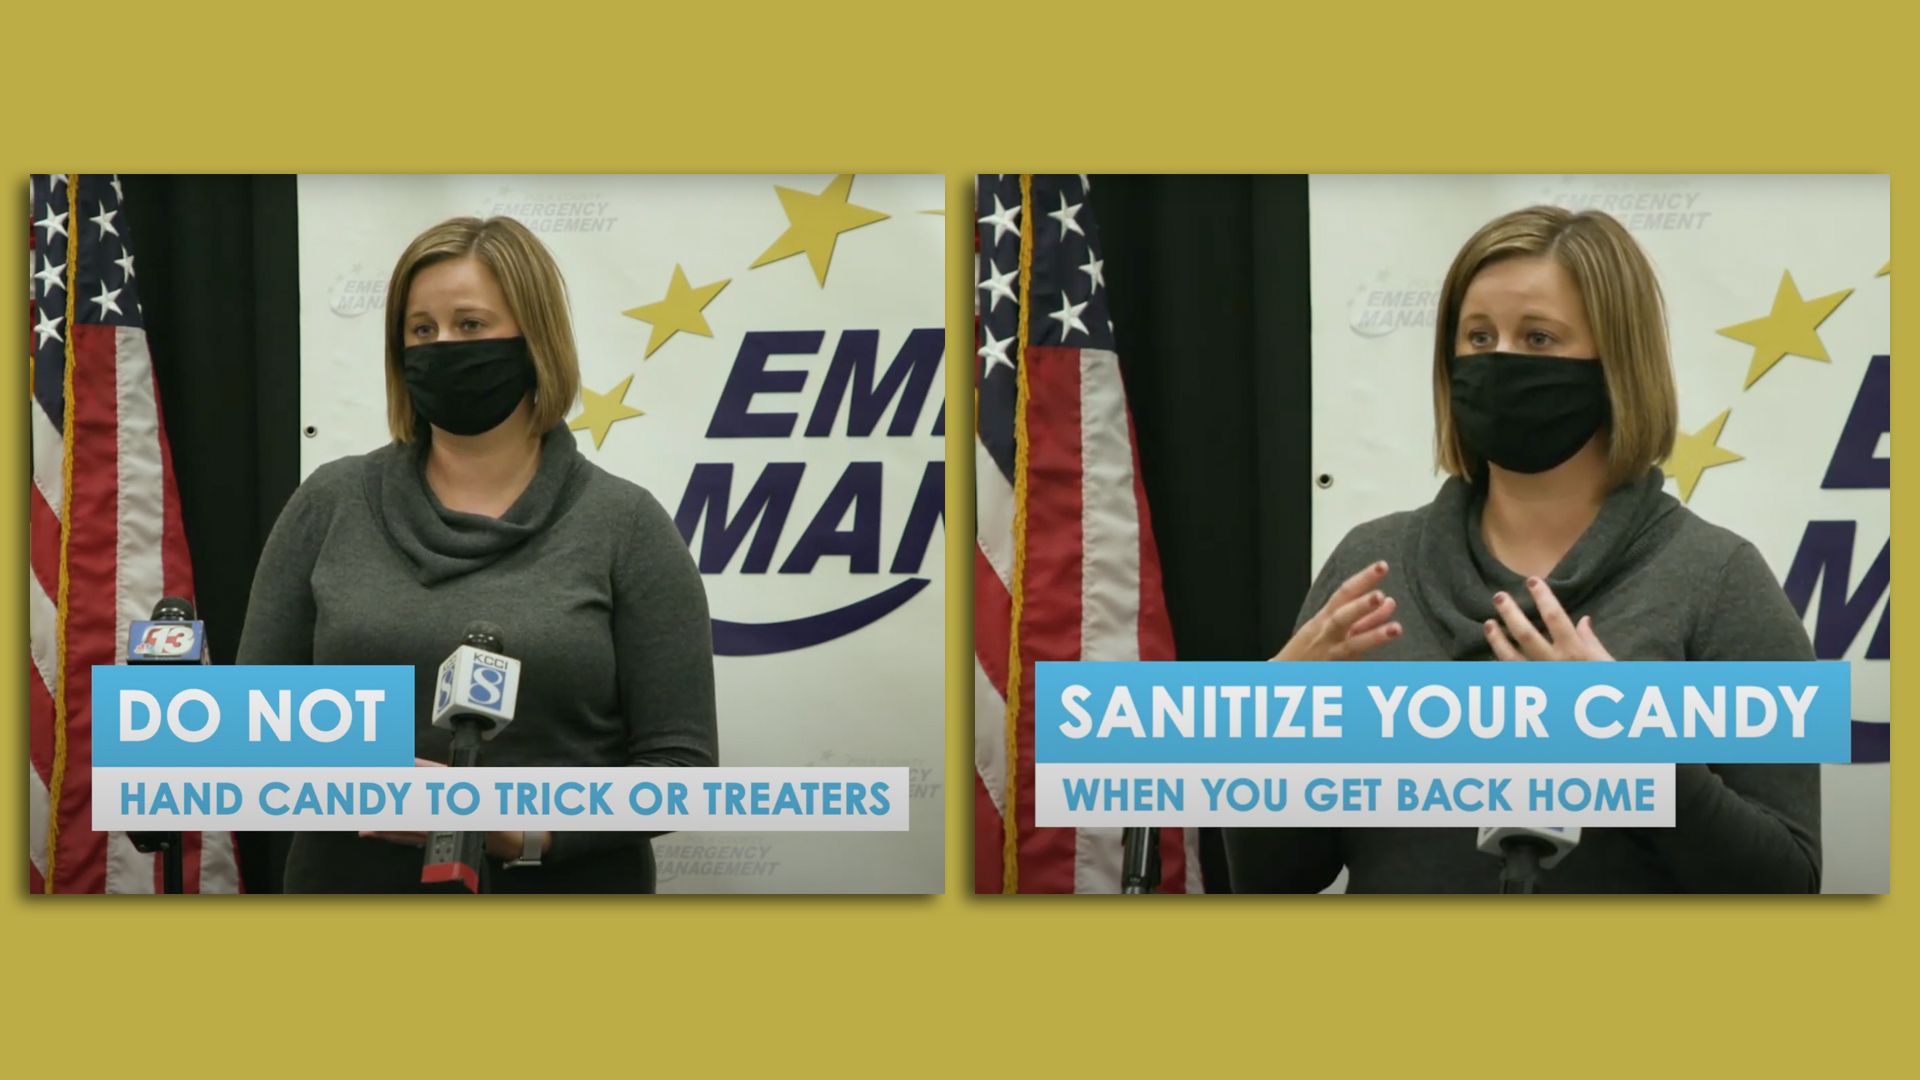 Nola Aigner Davis with the Polk County Health Department at an Oct. 29, 2020 press conference. Screenshot via city of Des Moines video